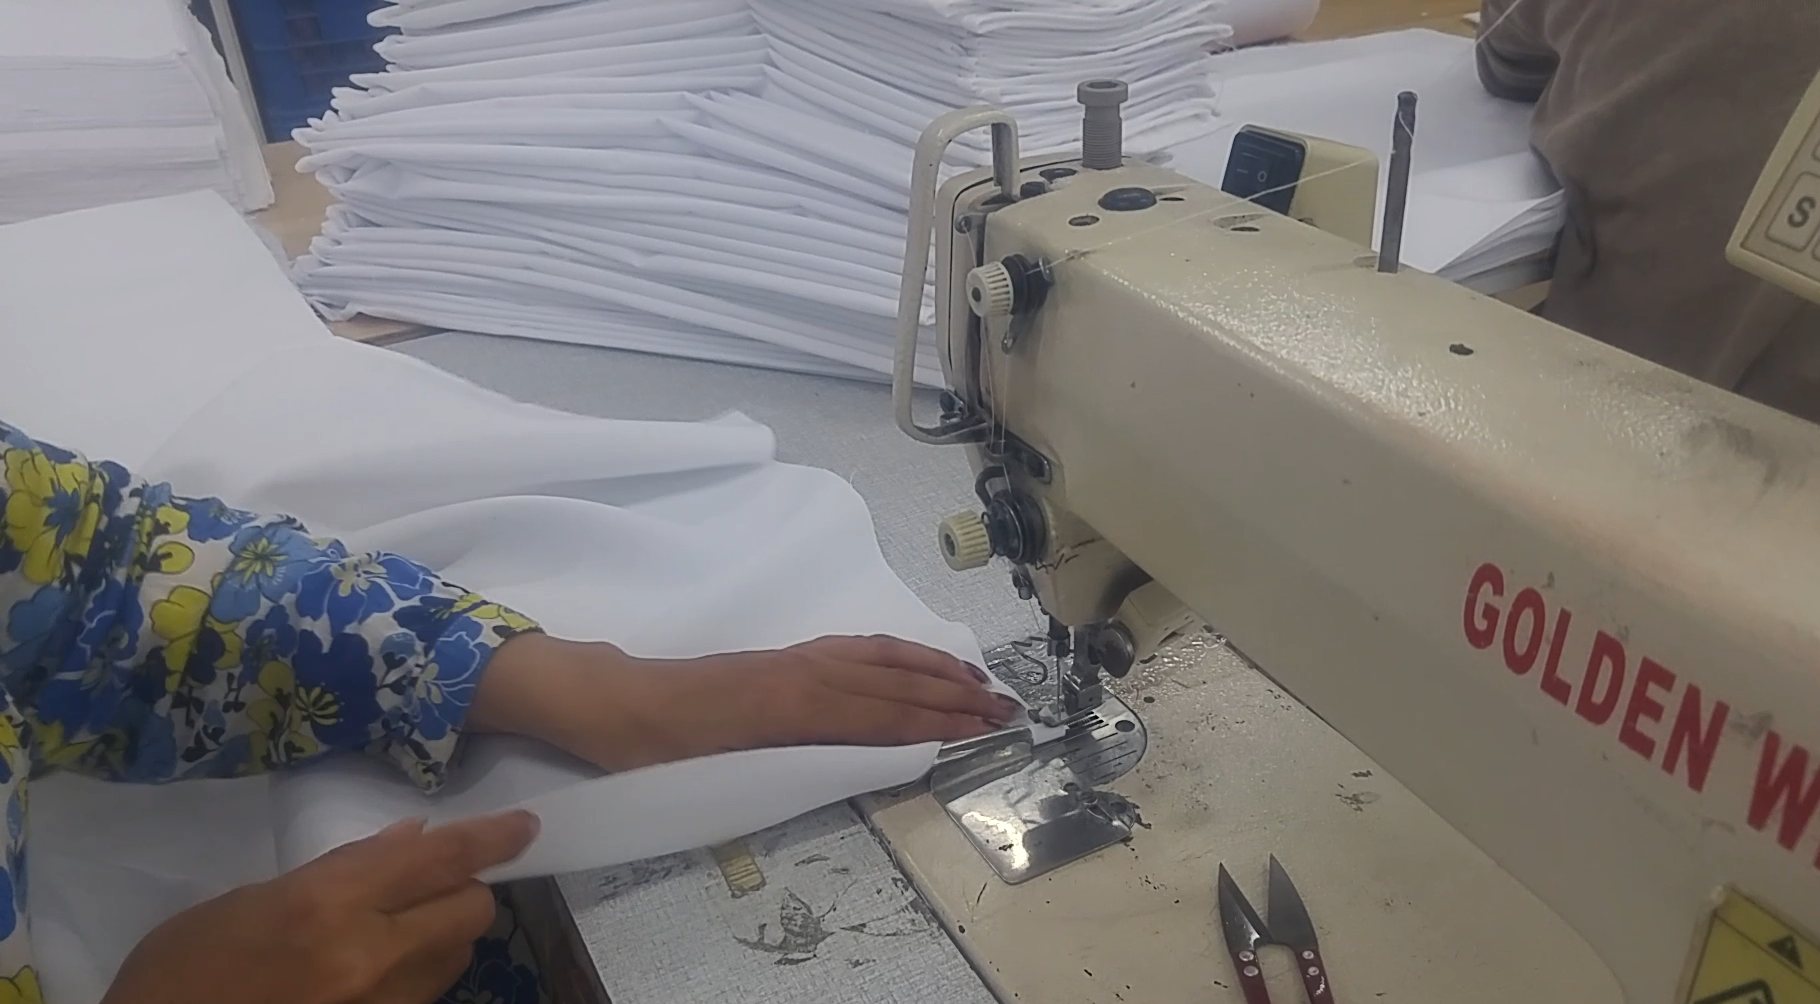 Difference between industrial machine and hand sewing machine